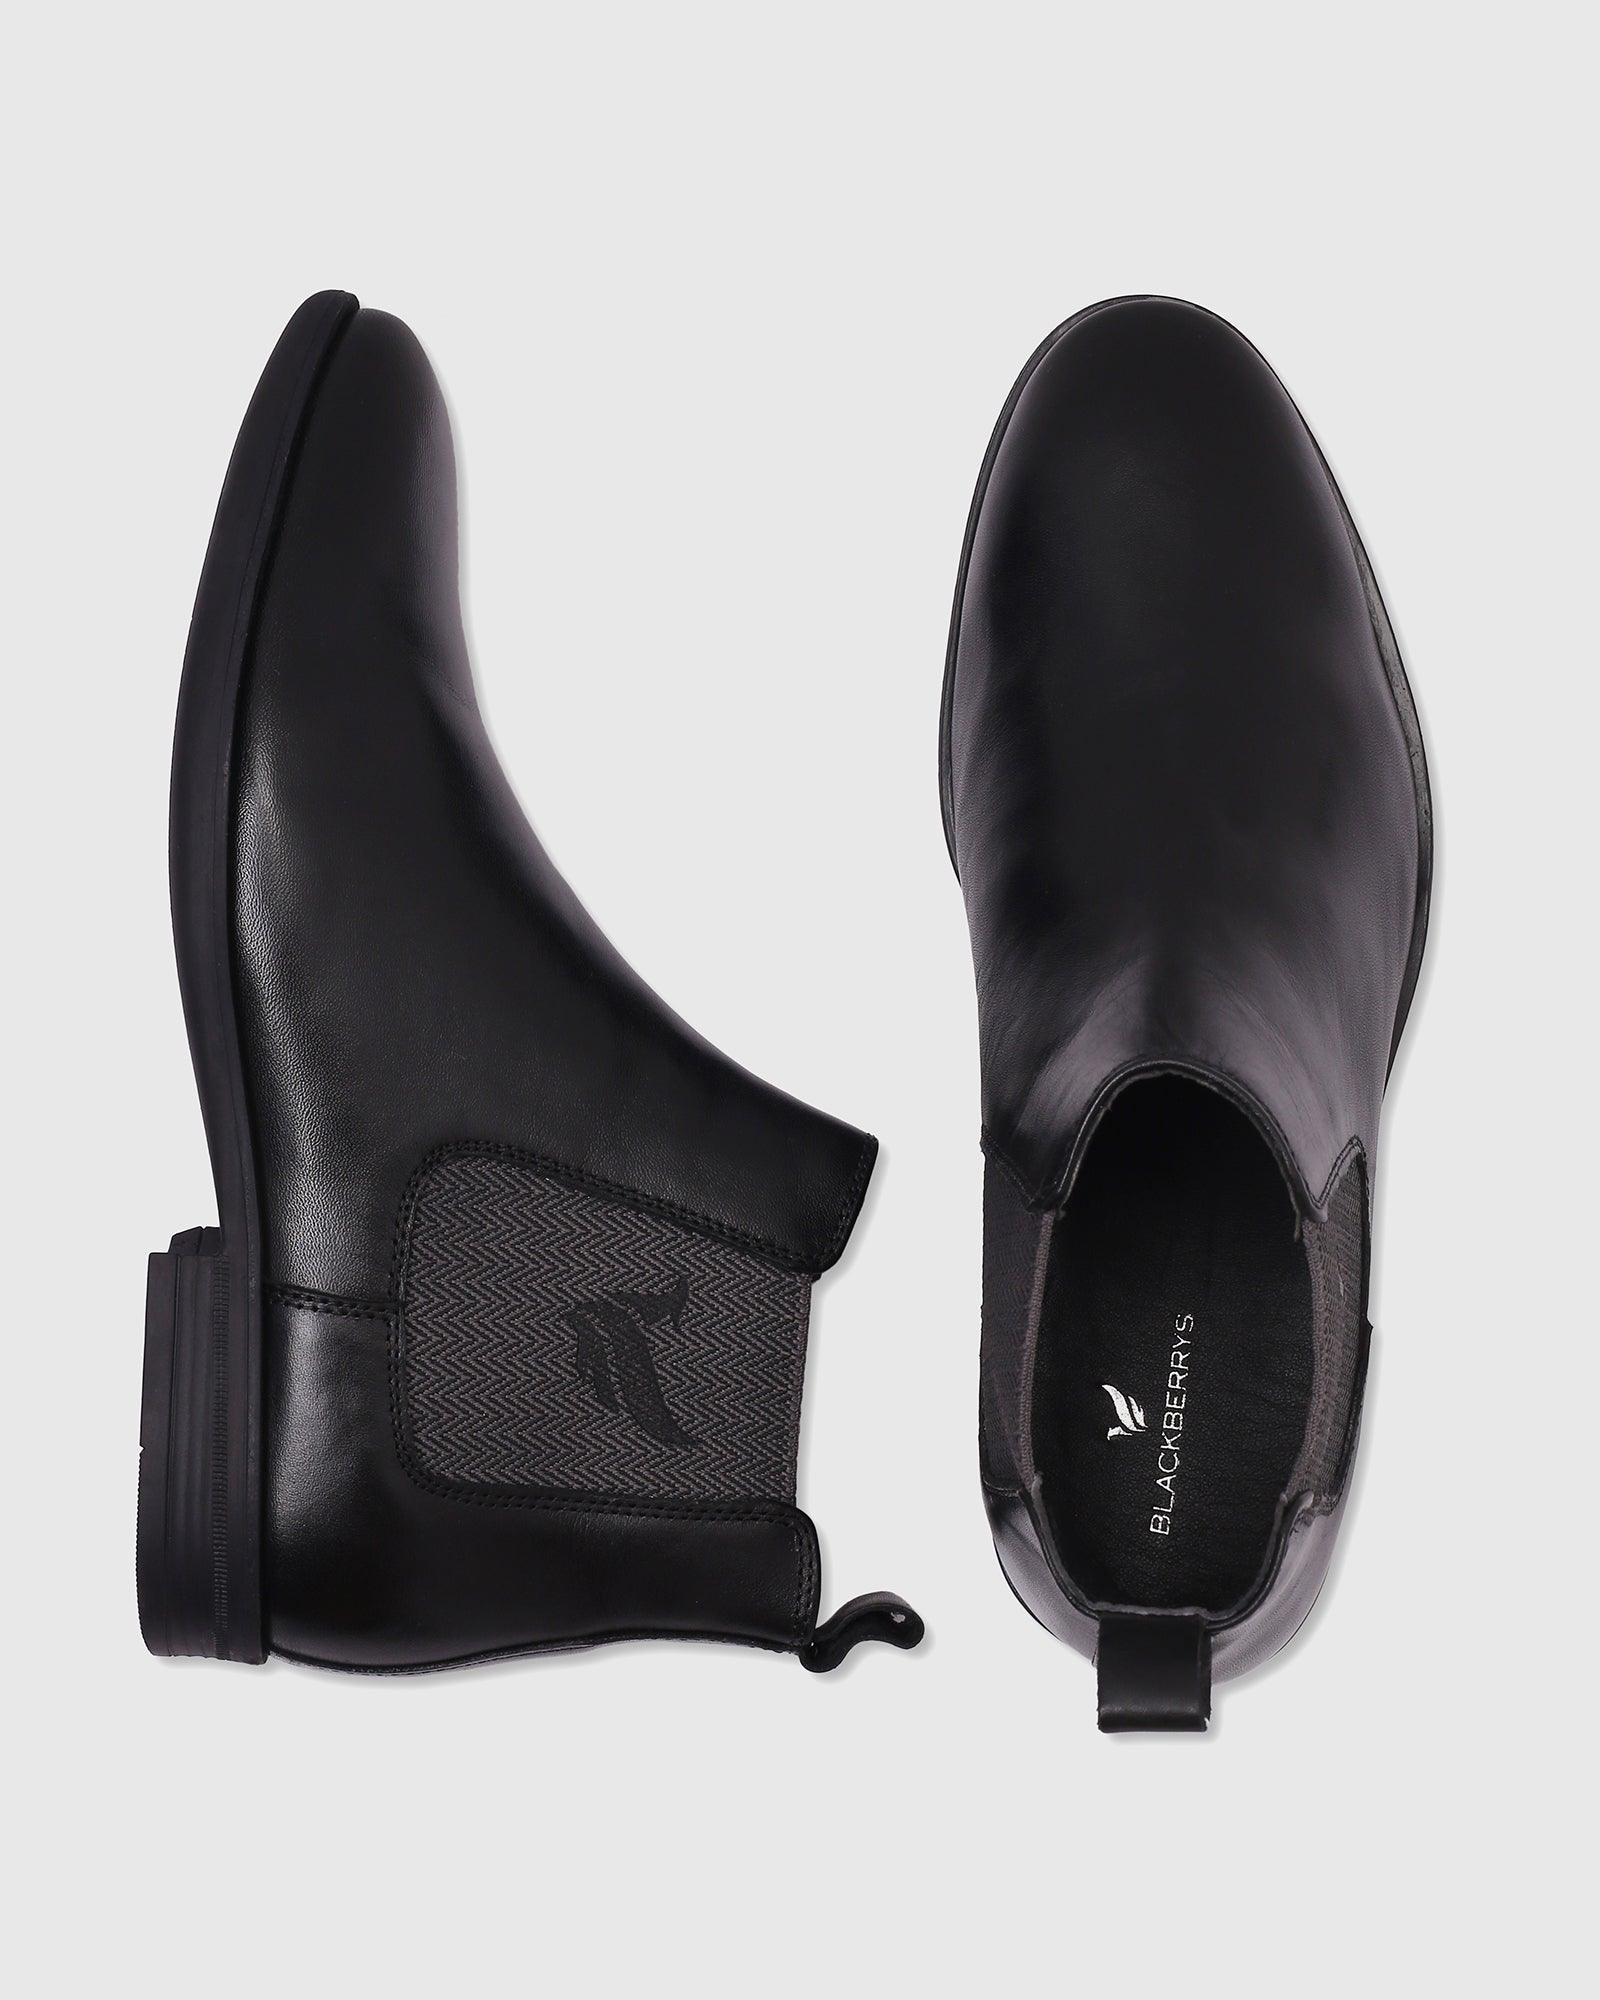 Leather Formal Black Solid Boot - Pajero